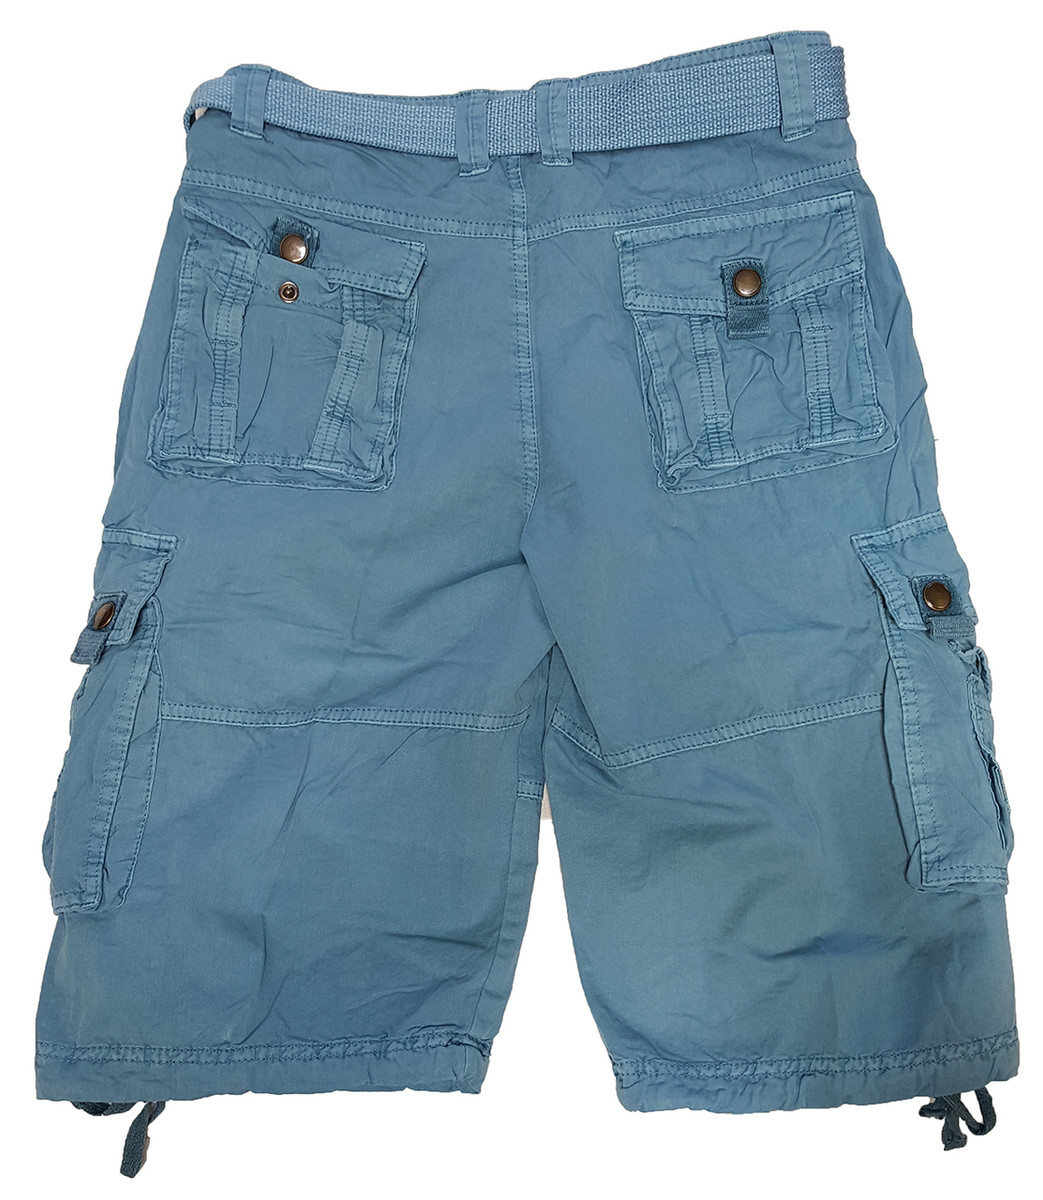 Mens Casual Cargo Shorts with Belt